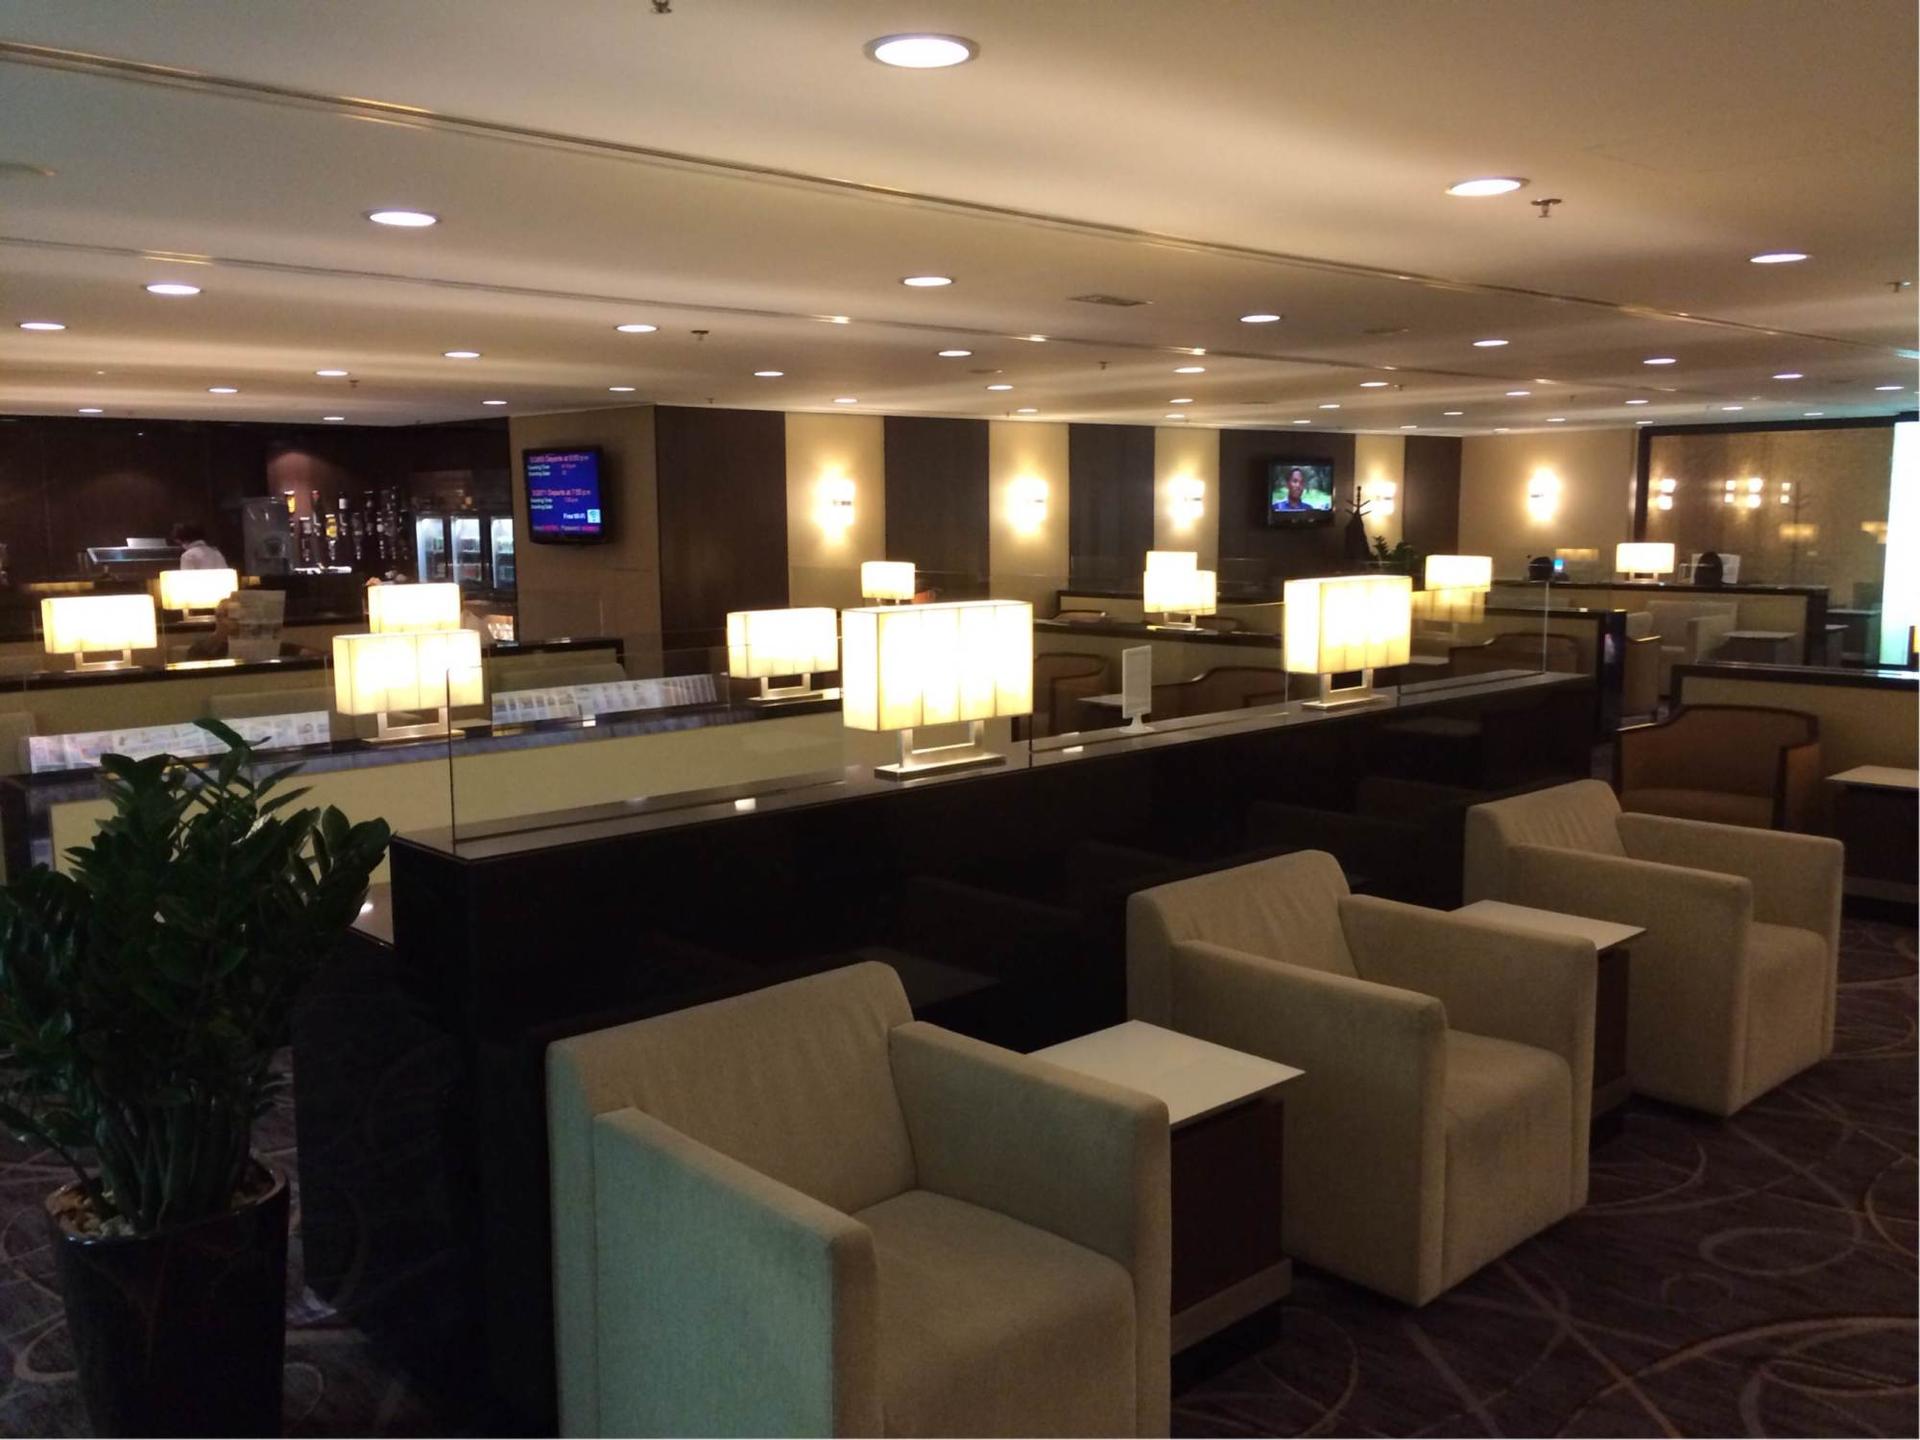 Singapore Airlines SilverKris Business Class Lounge image 16 of 68